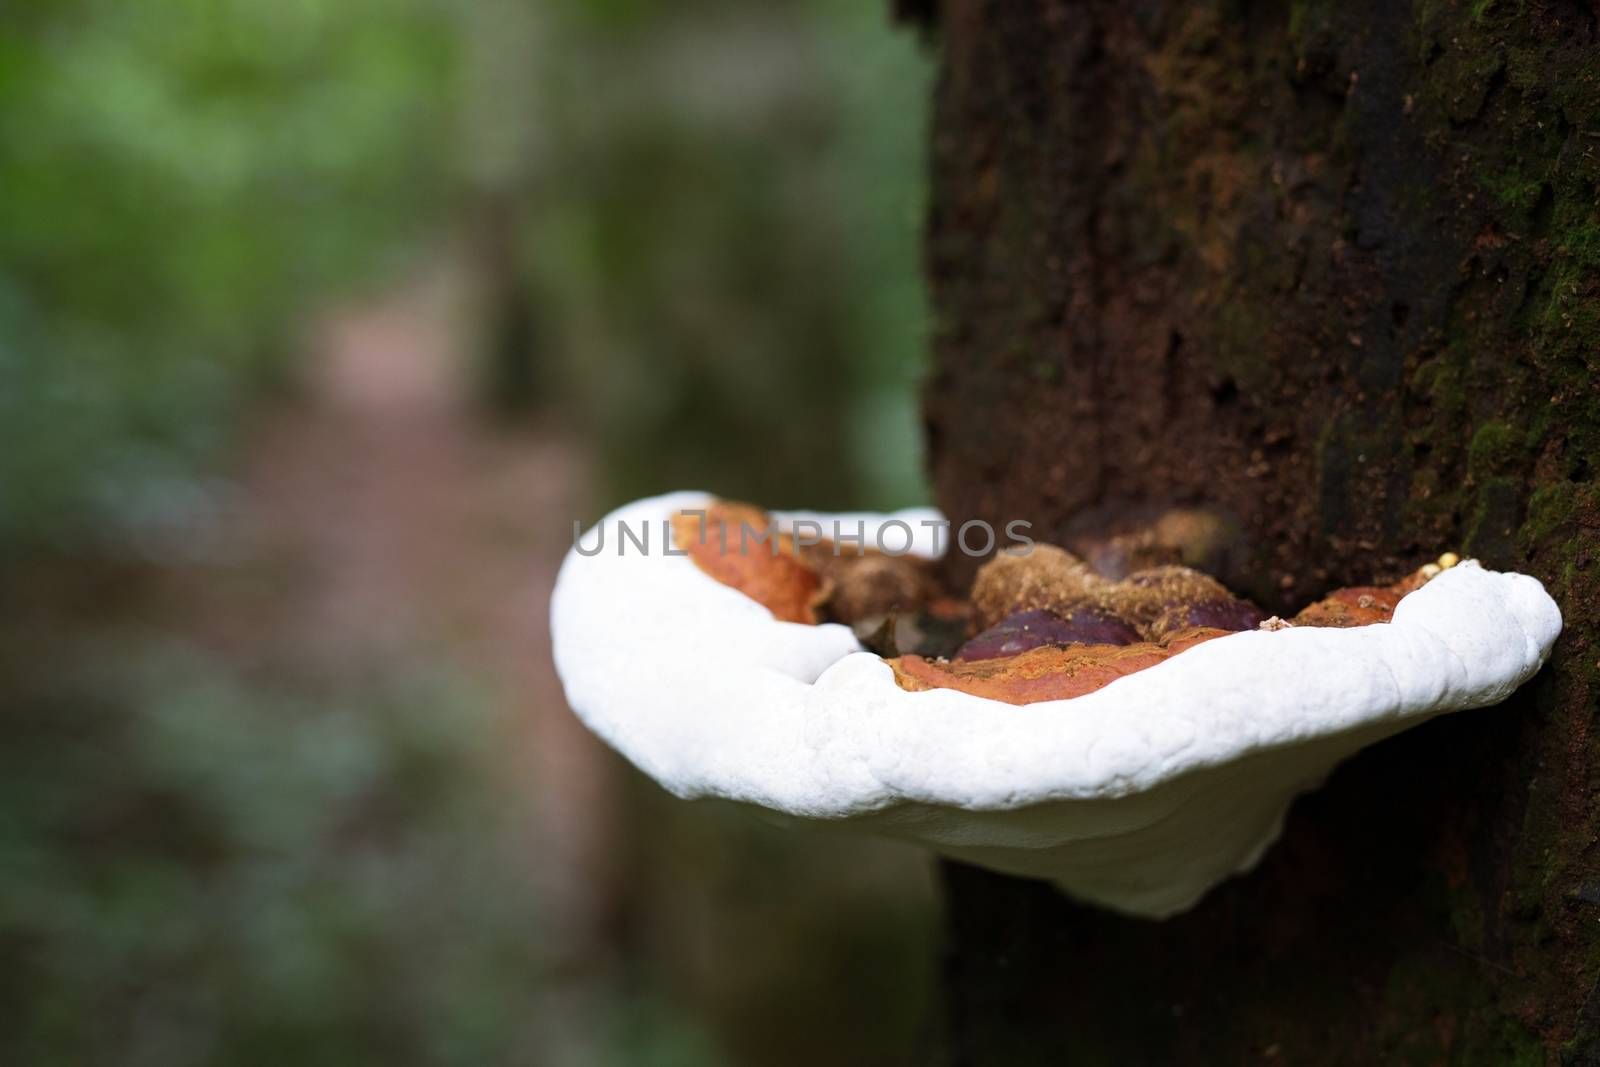 tropical evergreen forest is rich in mushroom grow by the tree naturally occurring.